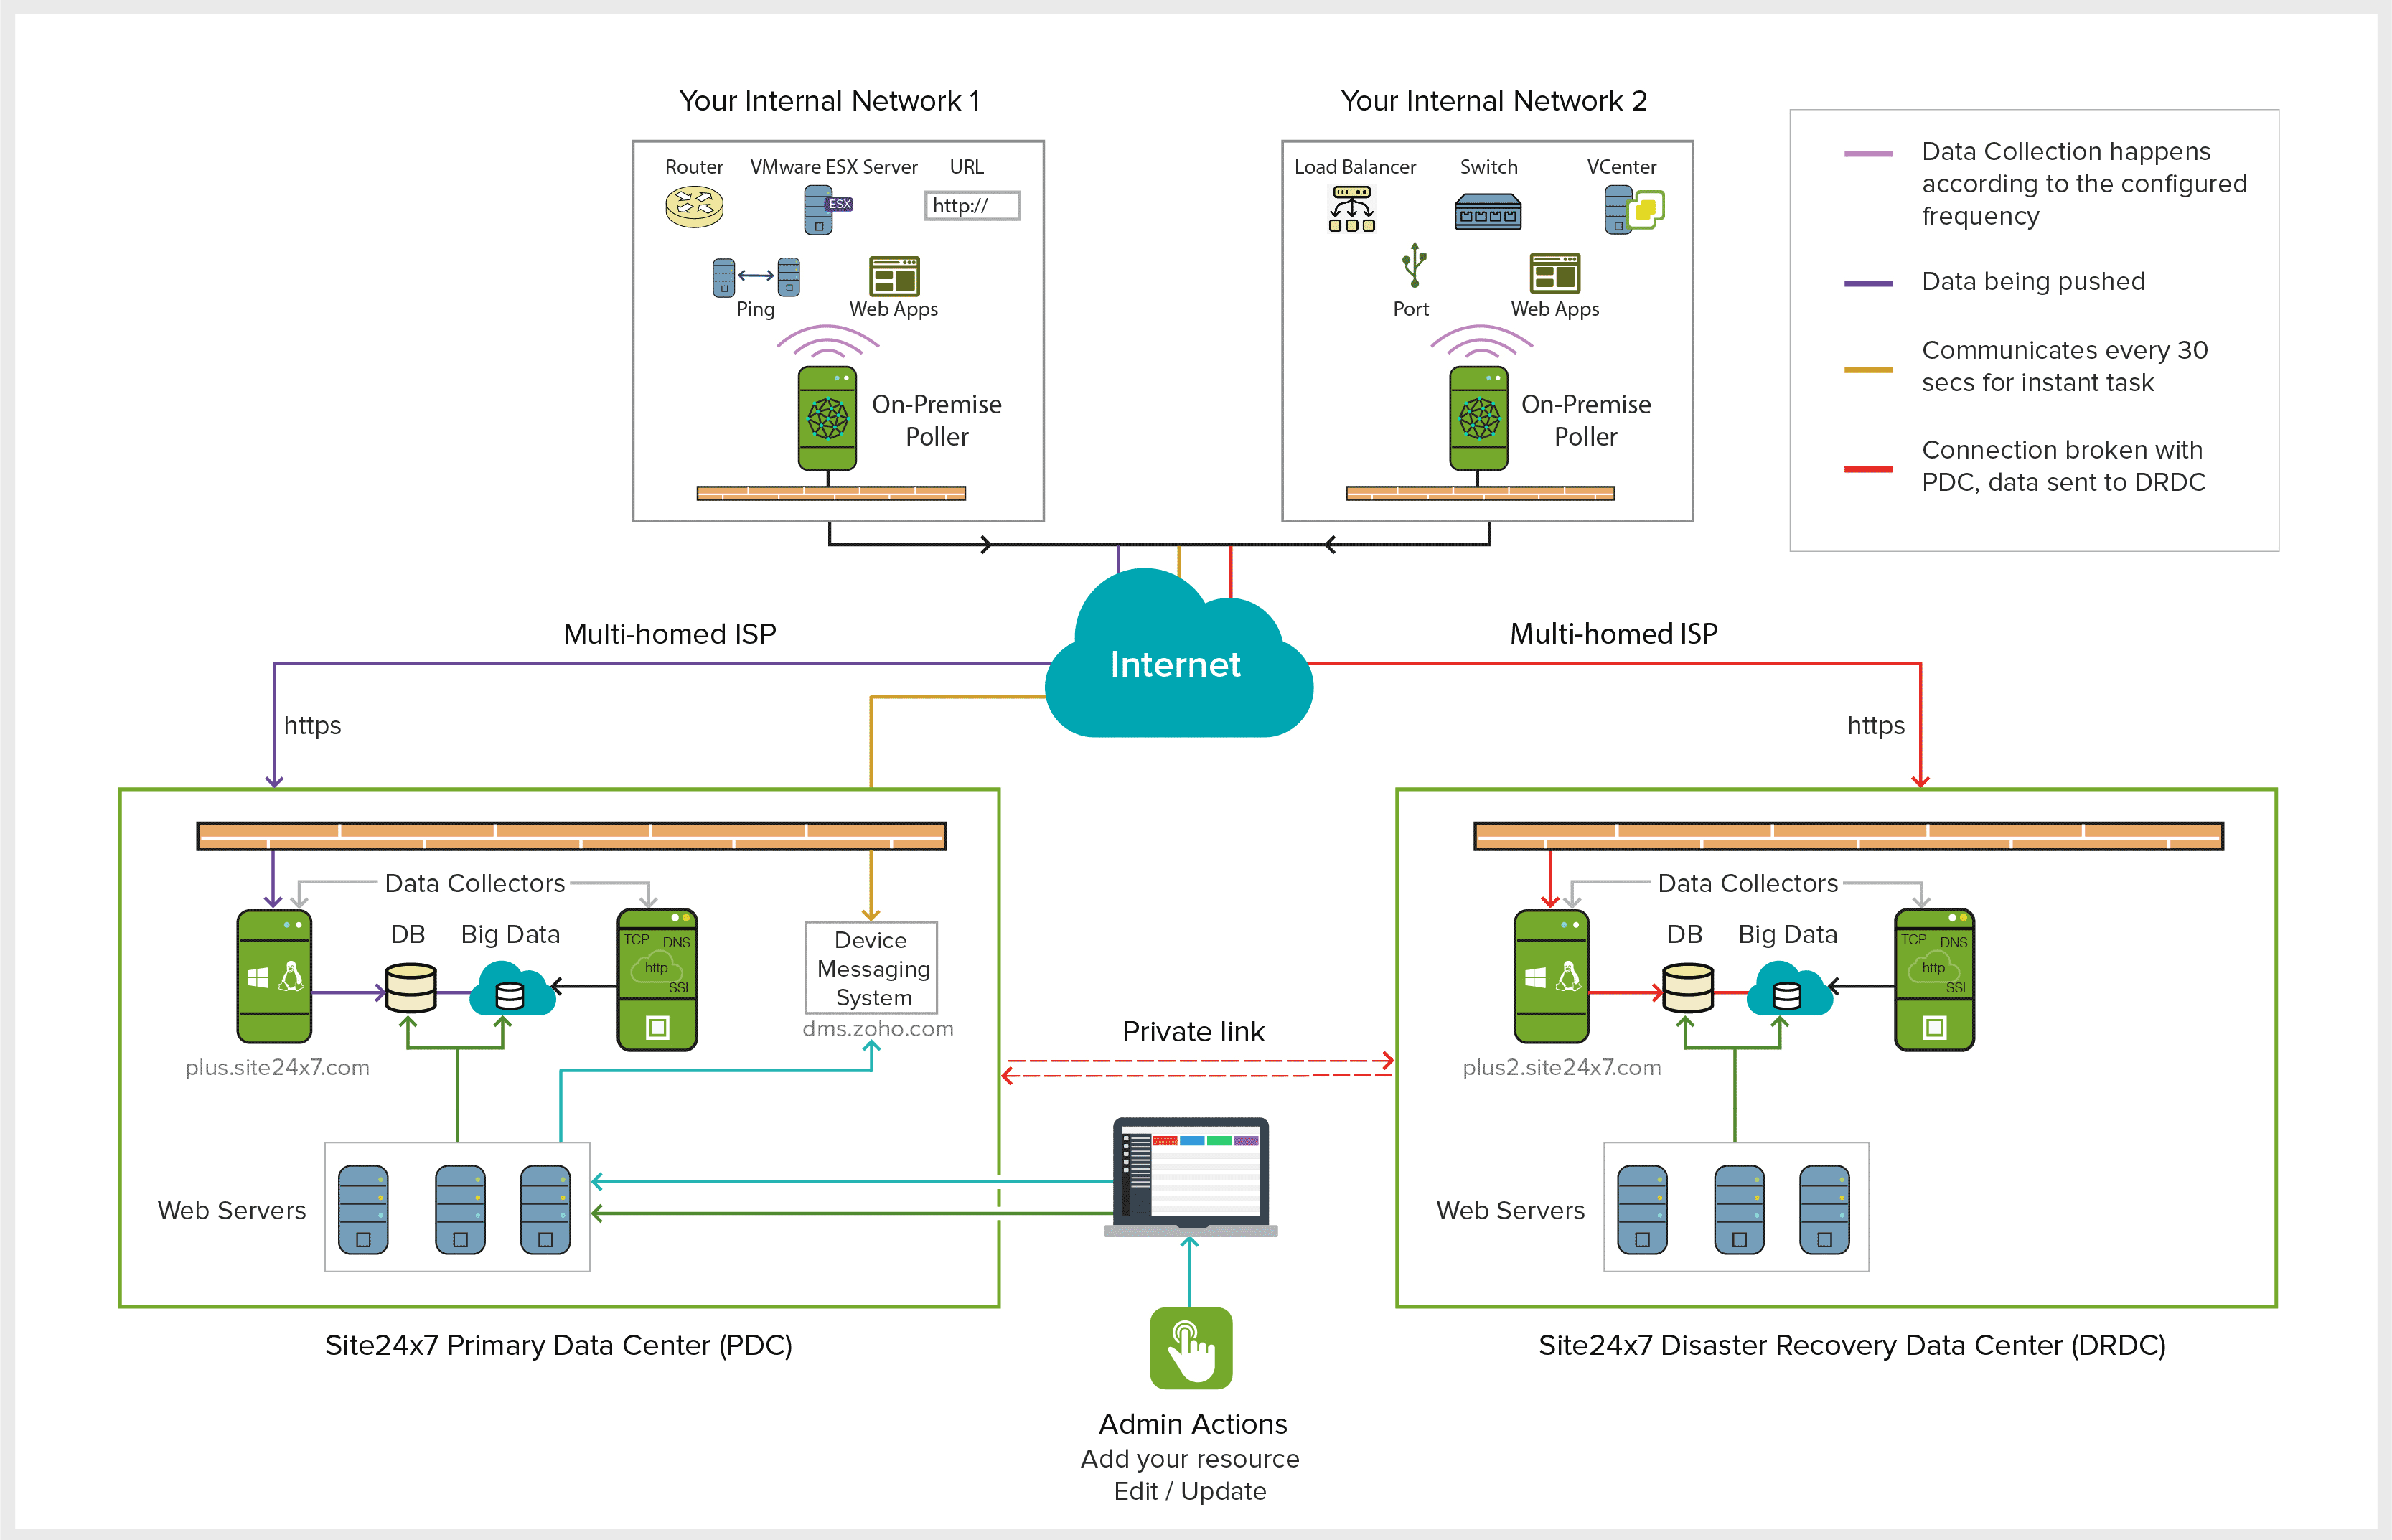 On-Premise Poller Architecture